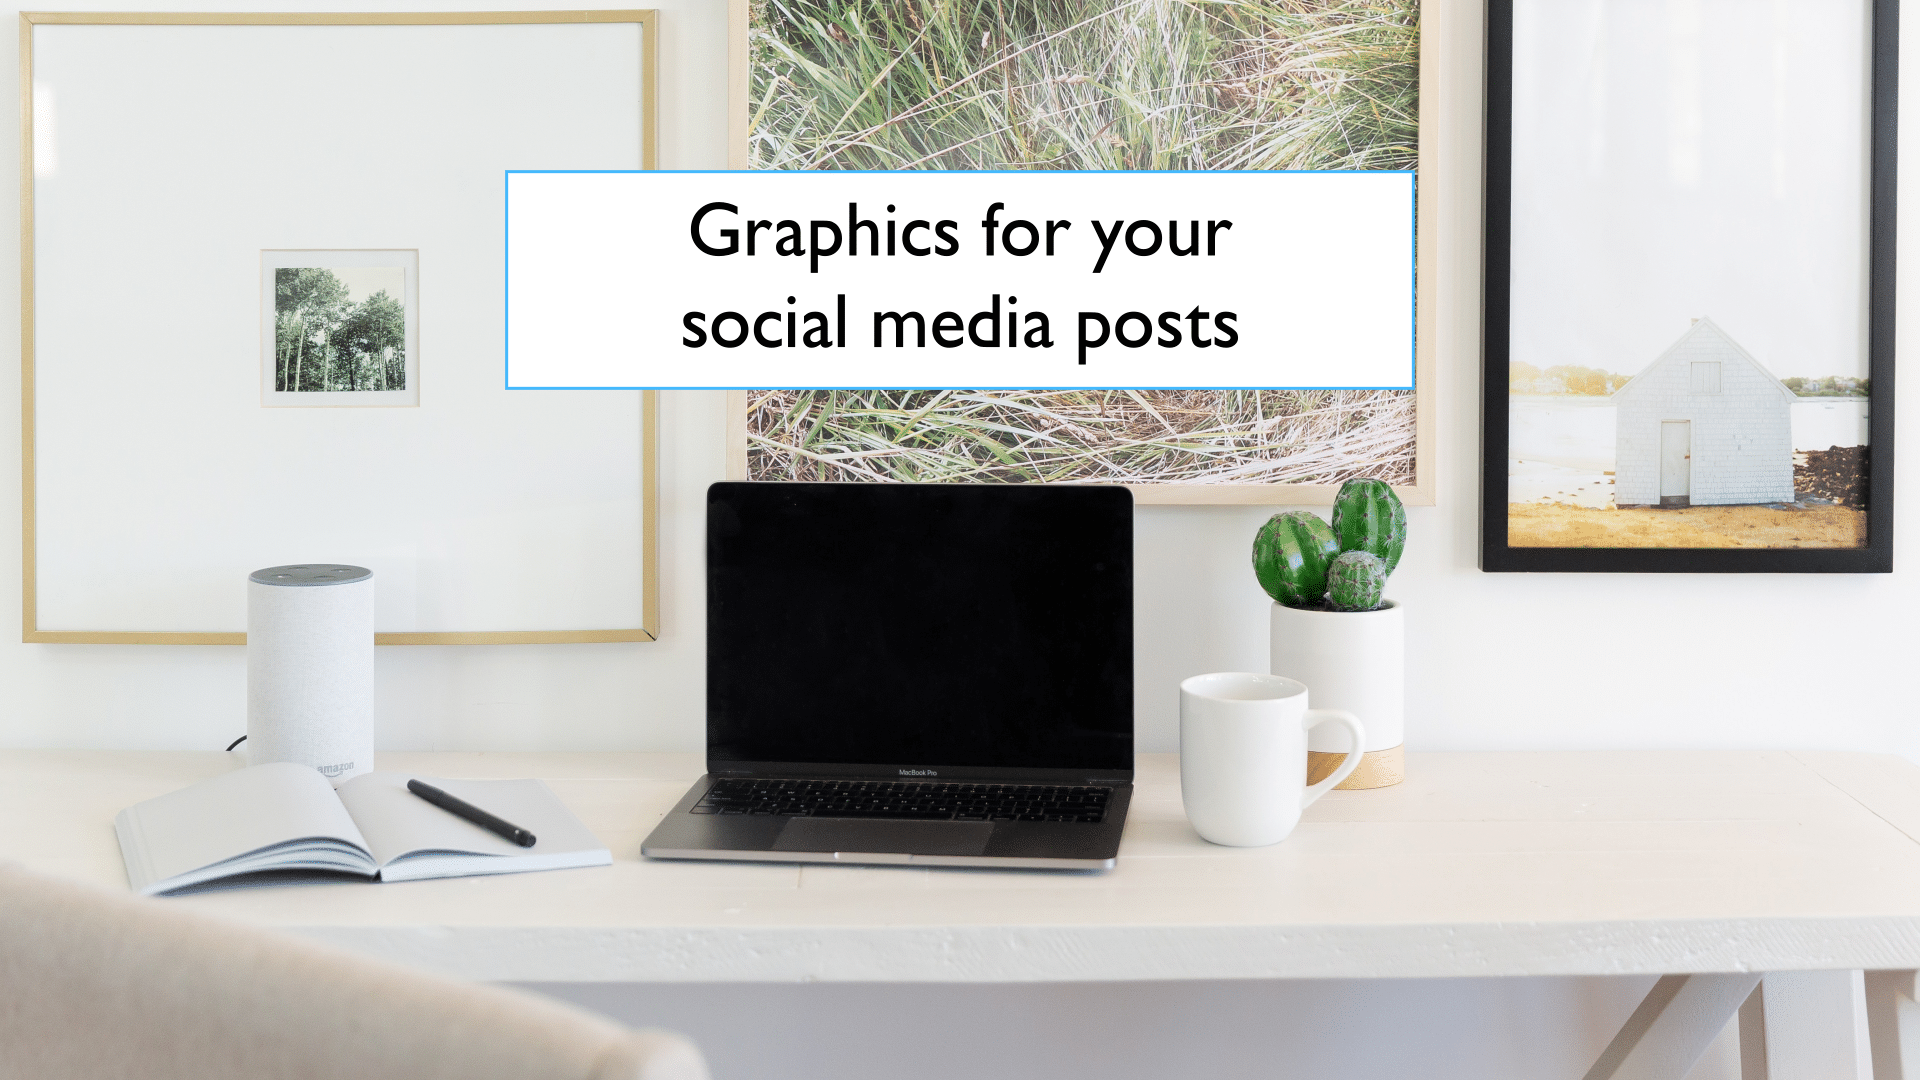 How can I create graphics for my social media posts